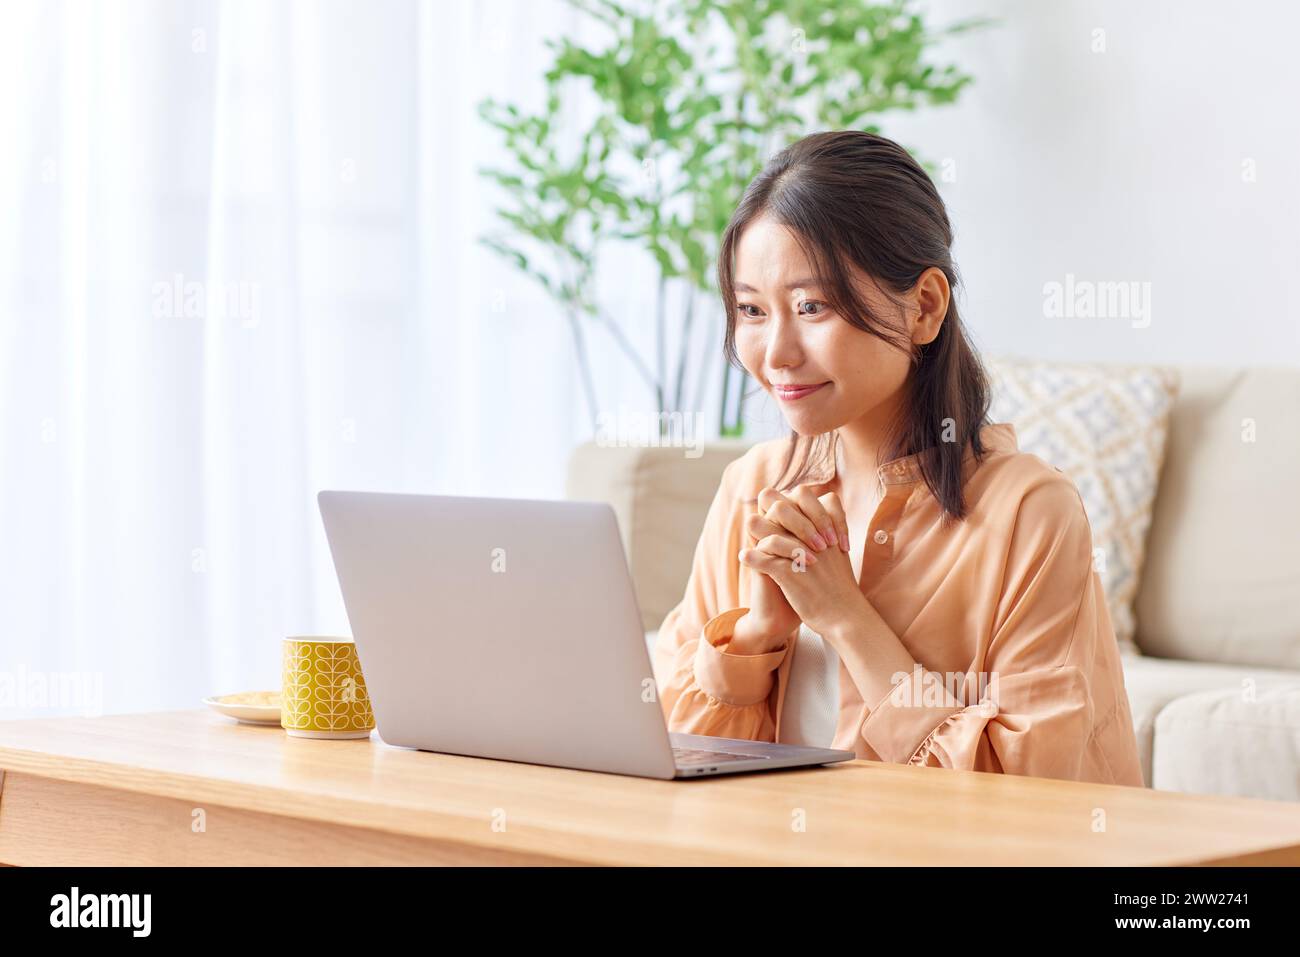 Asian woman using laptop in living room Banque D'Images